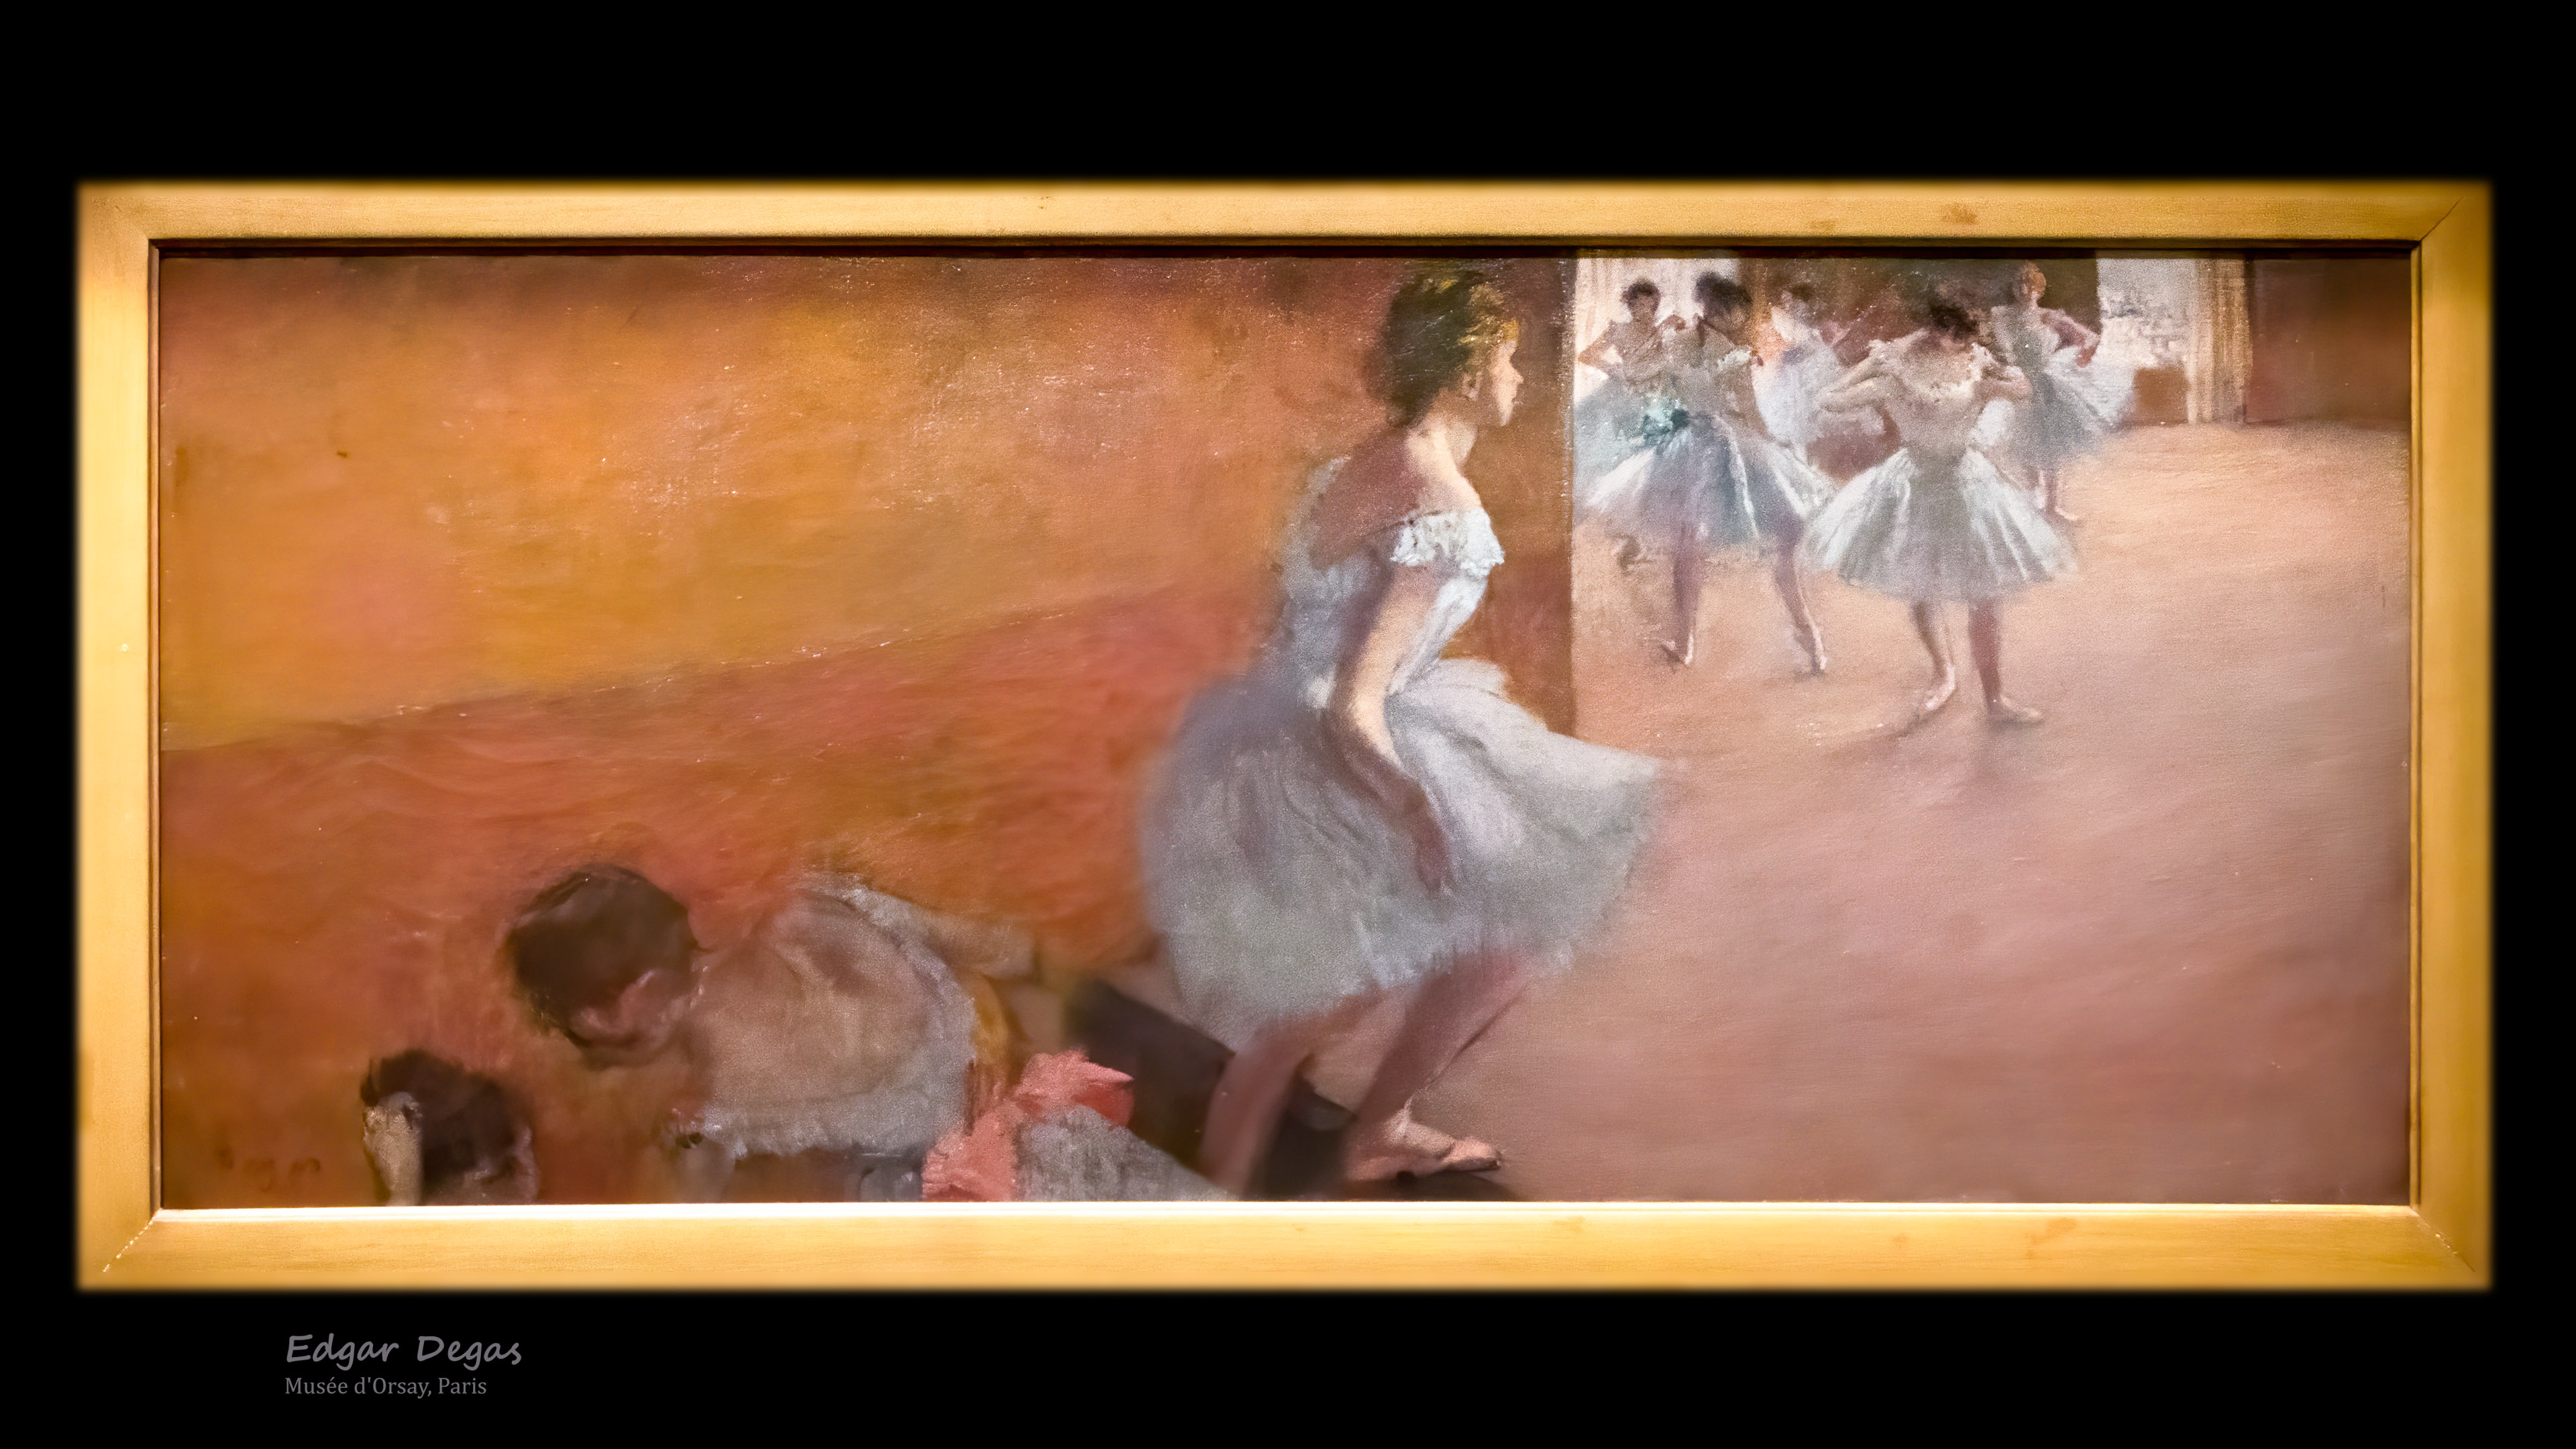 Witness the grace of Degas' ballet scenes on your PC with our HD painting wallpapers.